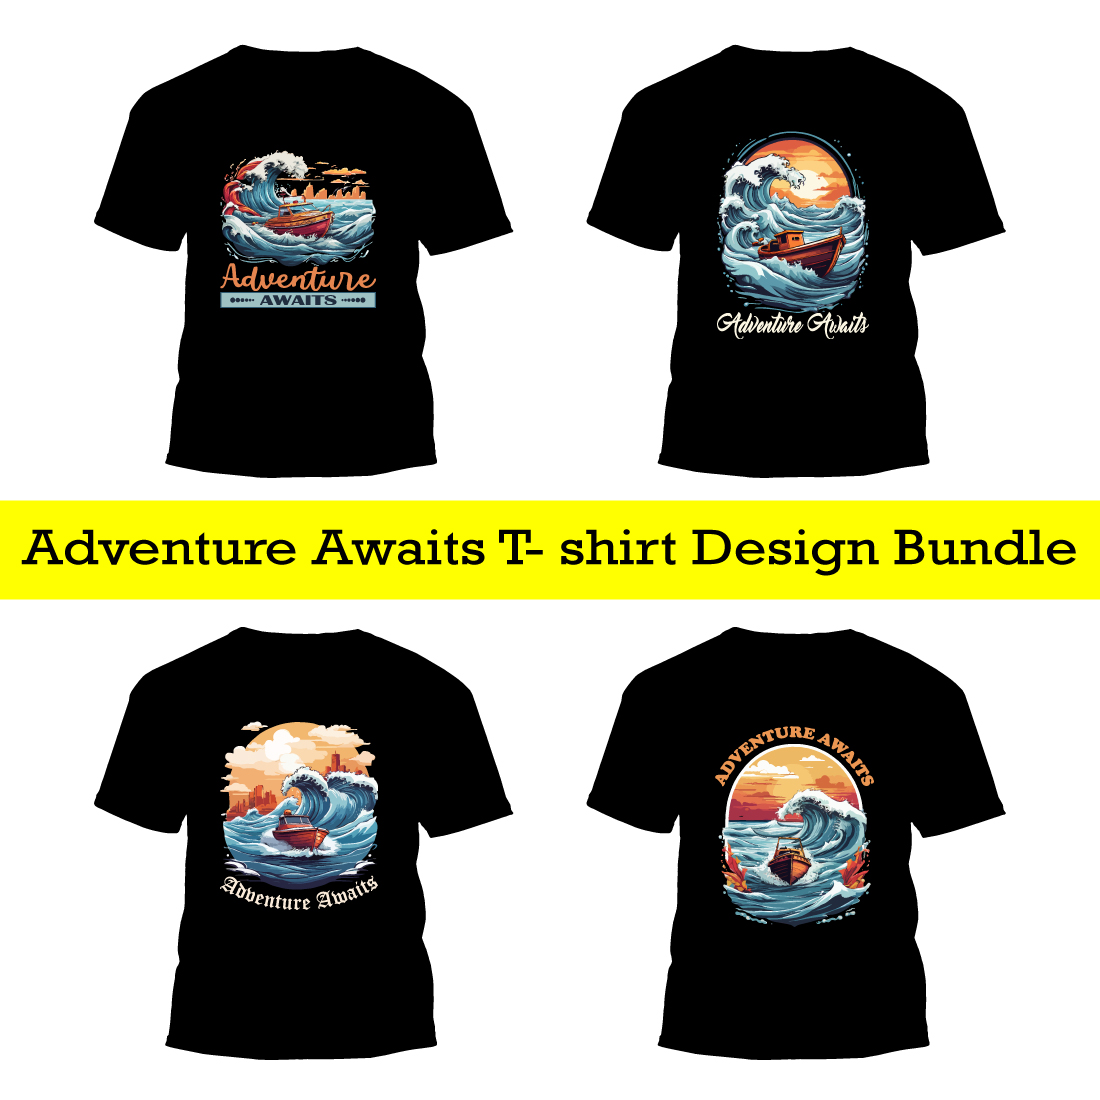 Adventure awaits t shirt design with a small boat riding the crest vector graphic for t-shirt prints, posters and other uses preview image.